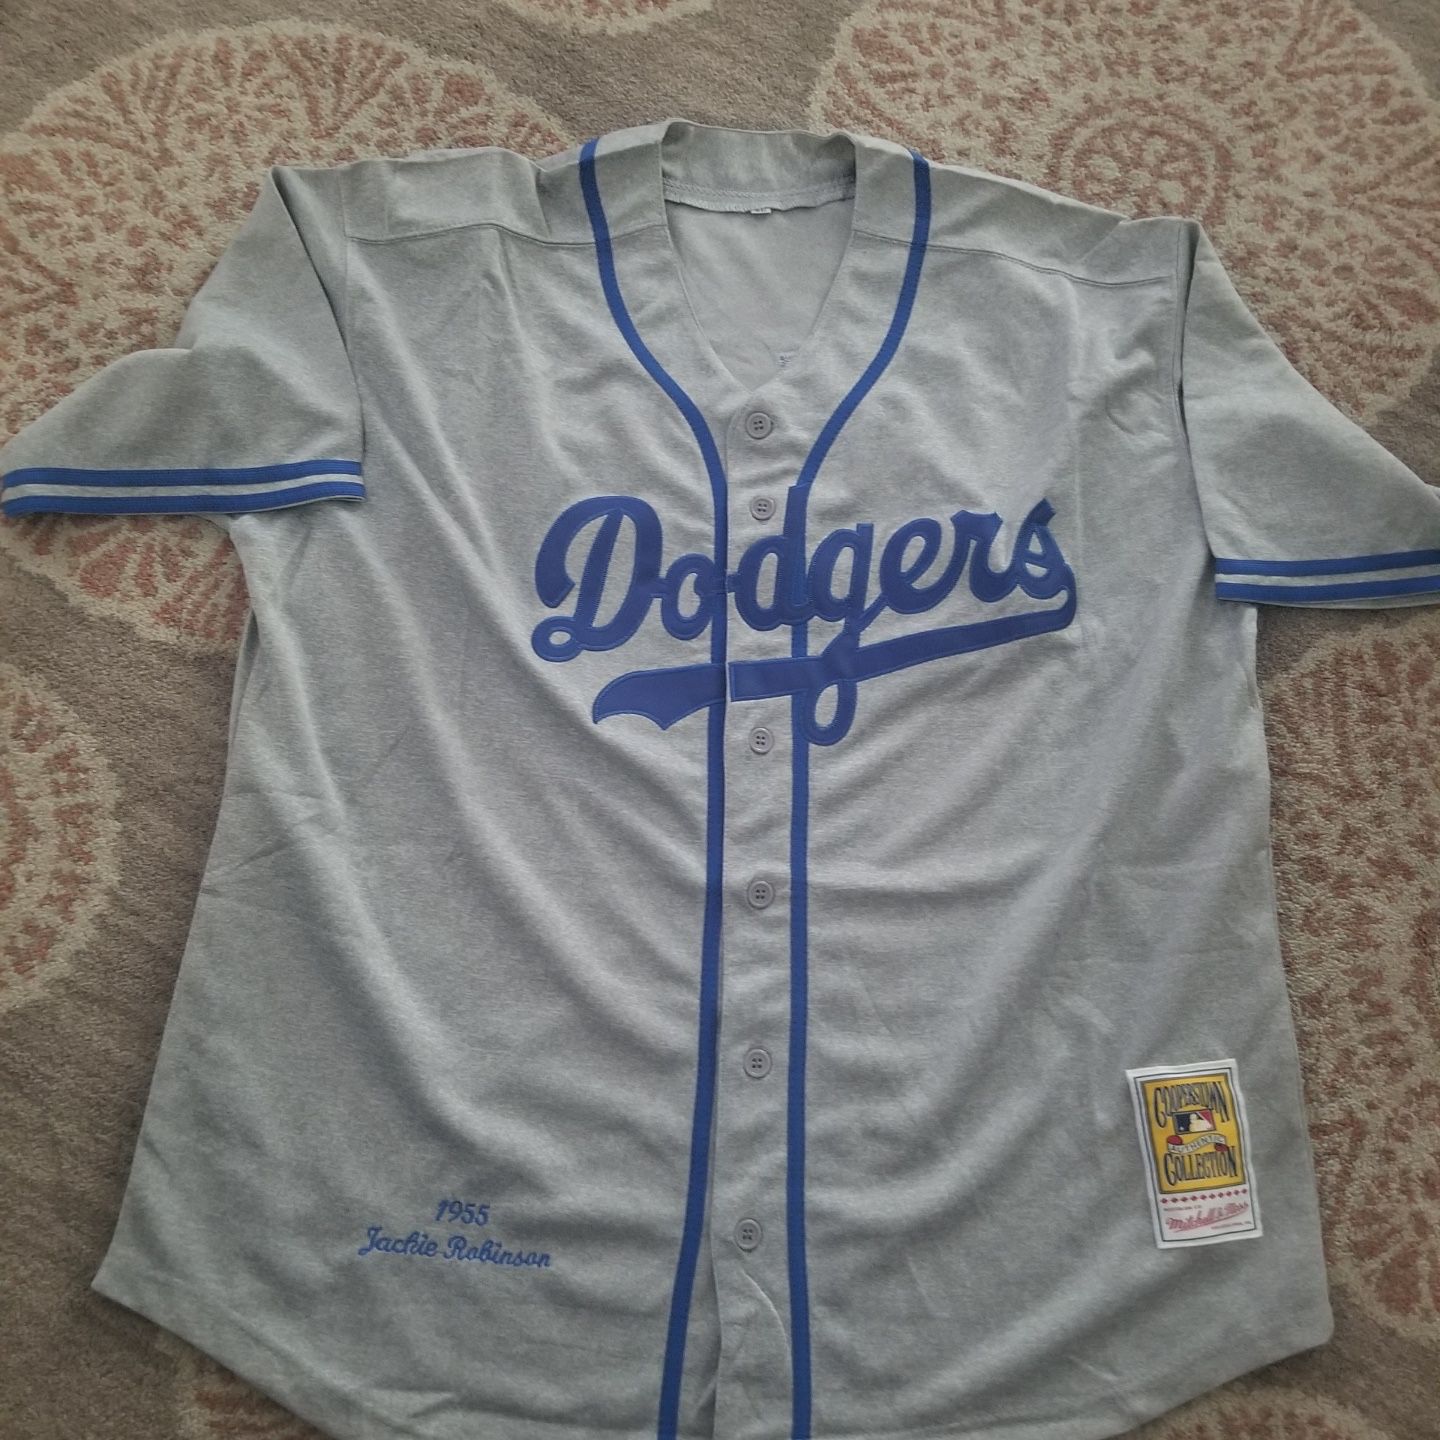 For Sale: 1955 Jackie Robinson mitchell and Ness dodgers jersey